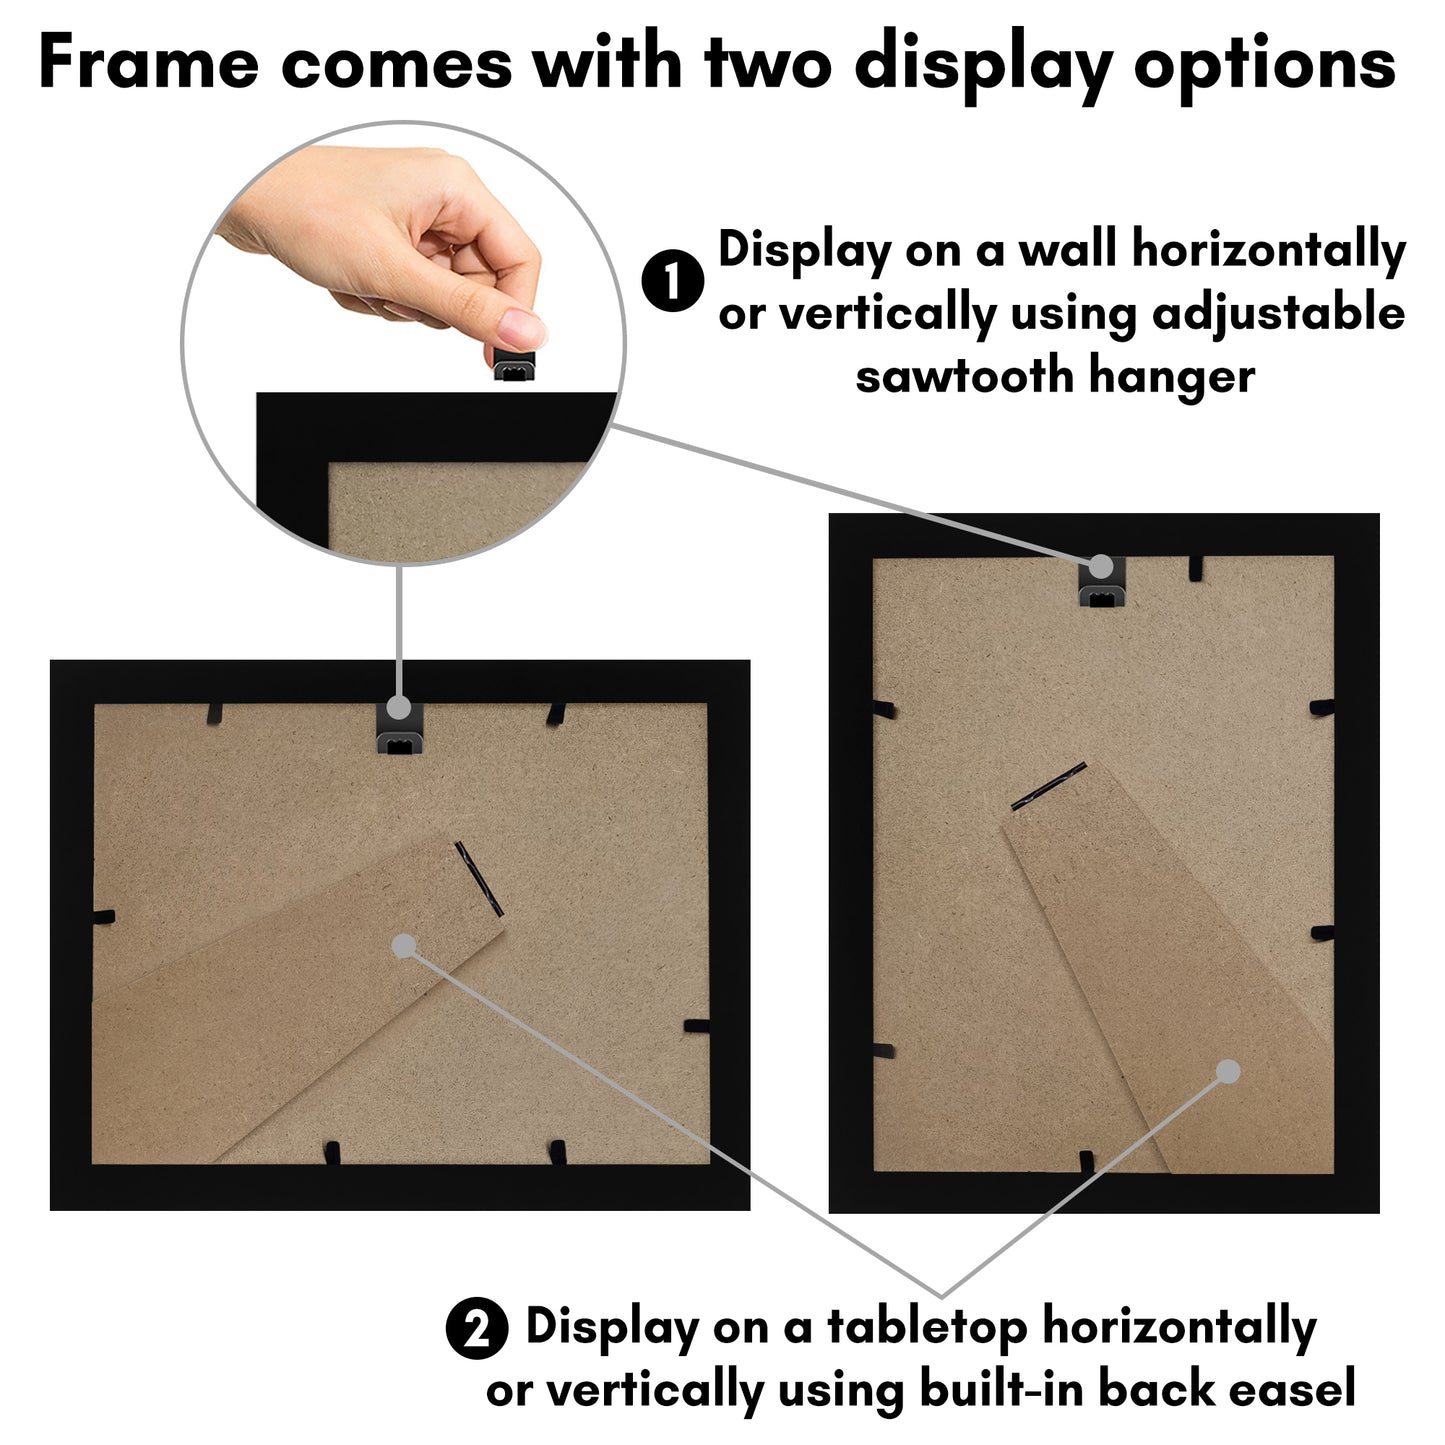 Picture Frame With Oval Mat - Engineered Wood Photo Frame with Shatter-Resistant Glass Cover